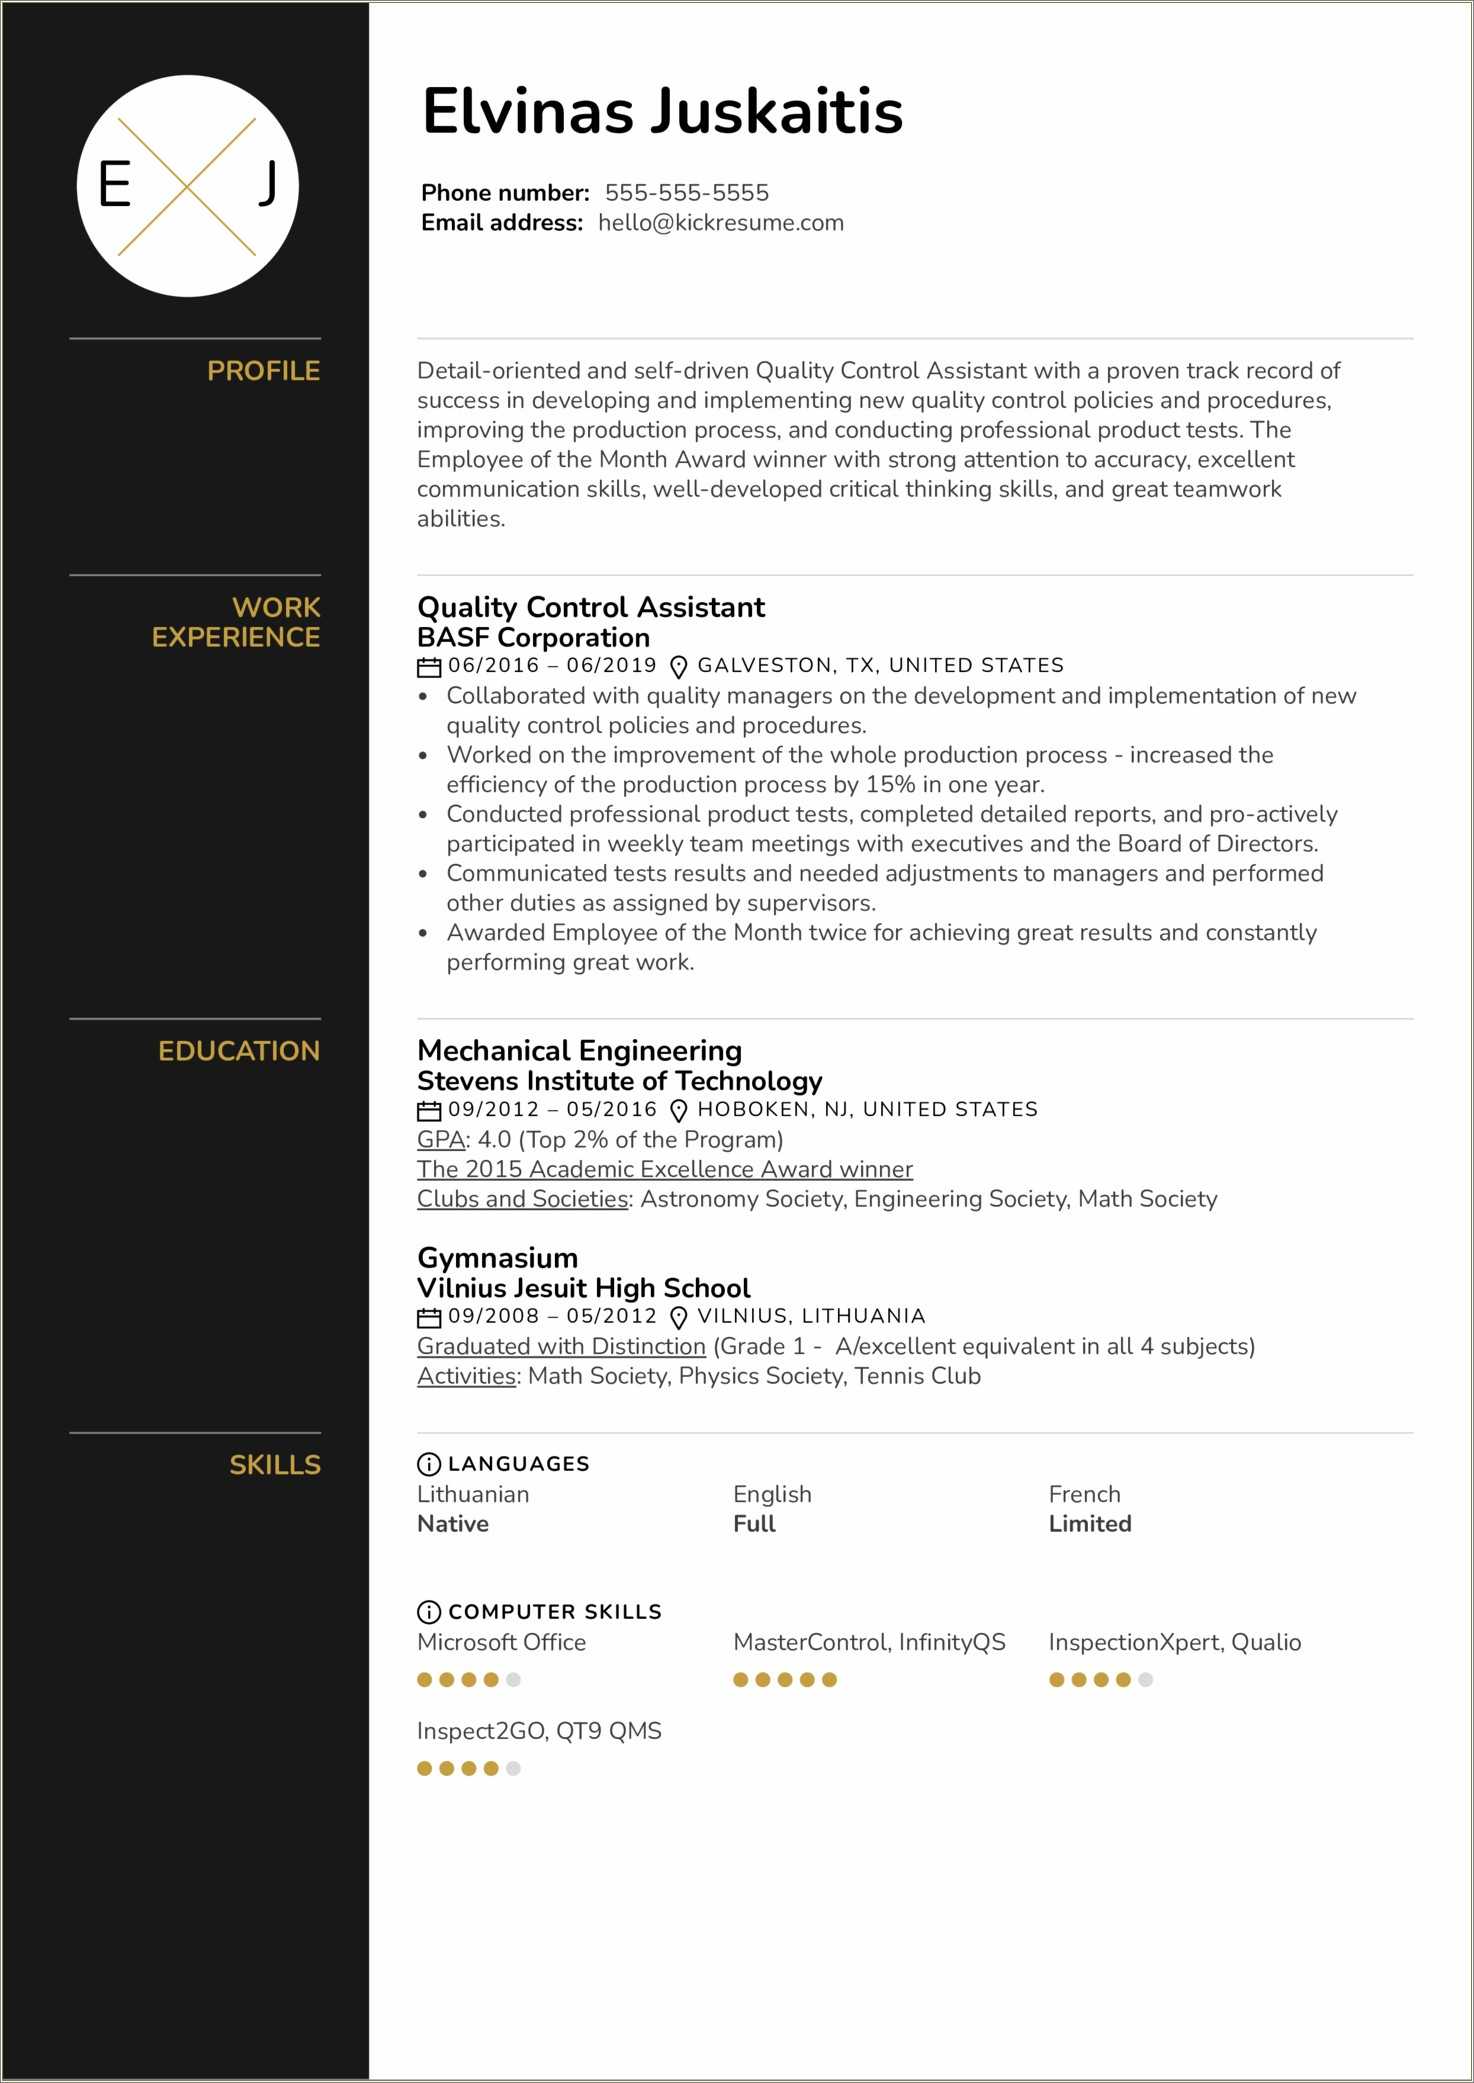 Dds With C++ Sample Resumes - Resume Example Gallery